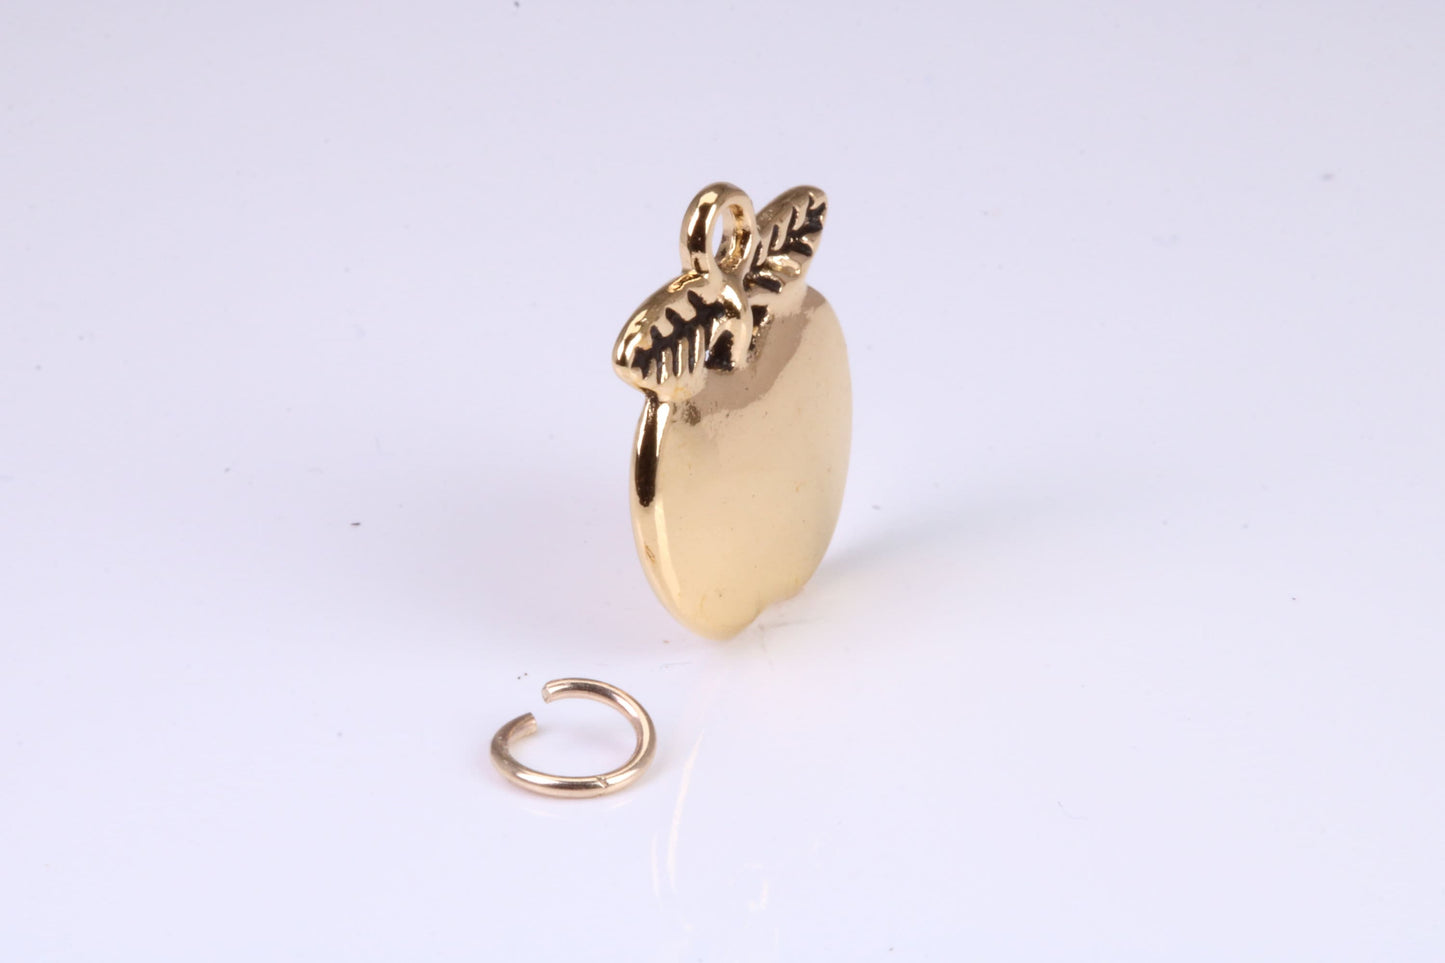 Apple Charm, Traditional Charm, Made from Solid Yellow Gold, British Hallmarked, Complete with Attachment Link